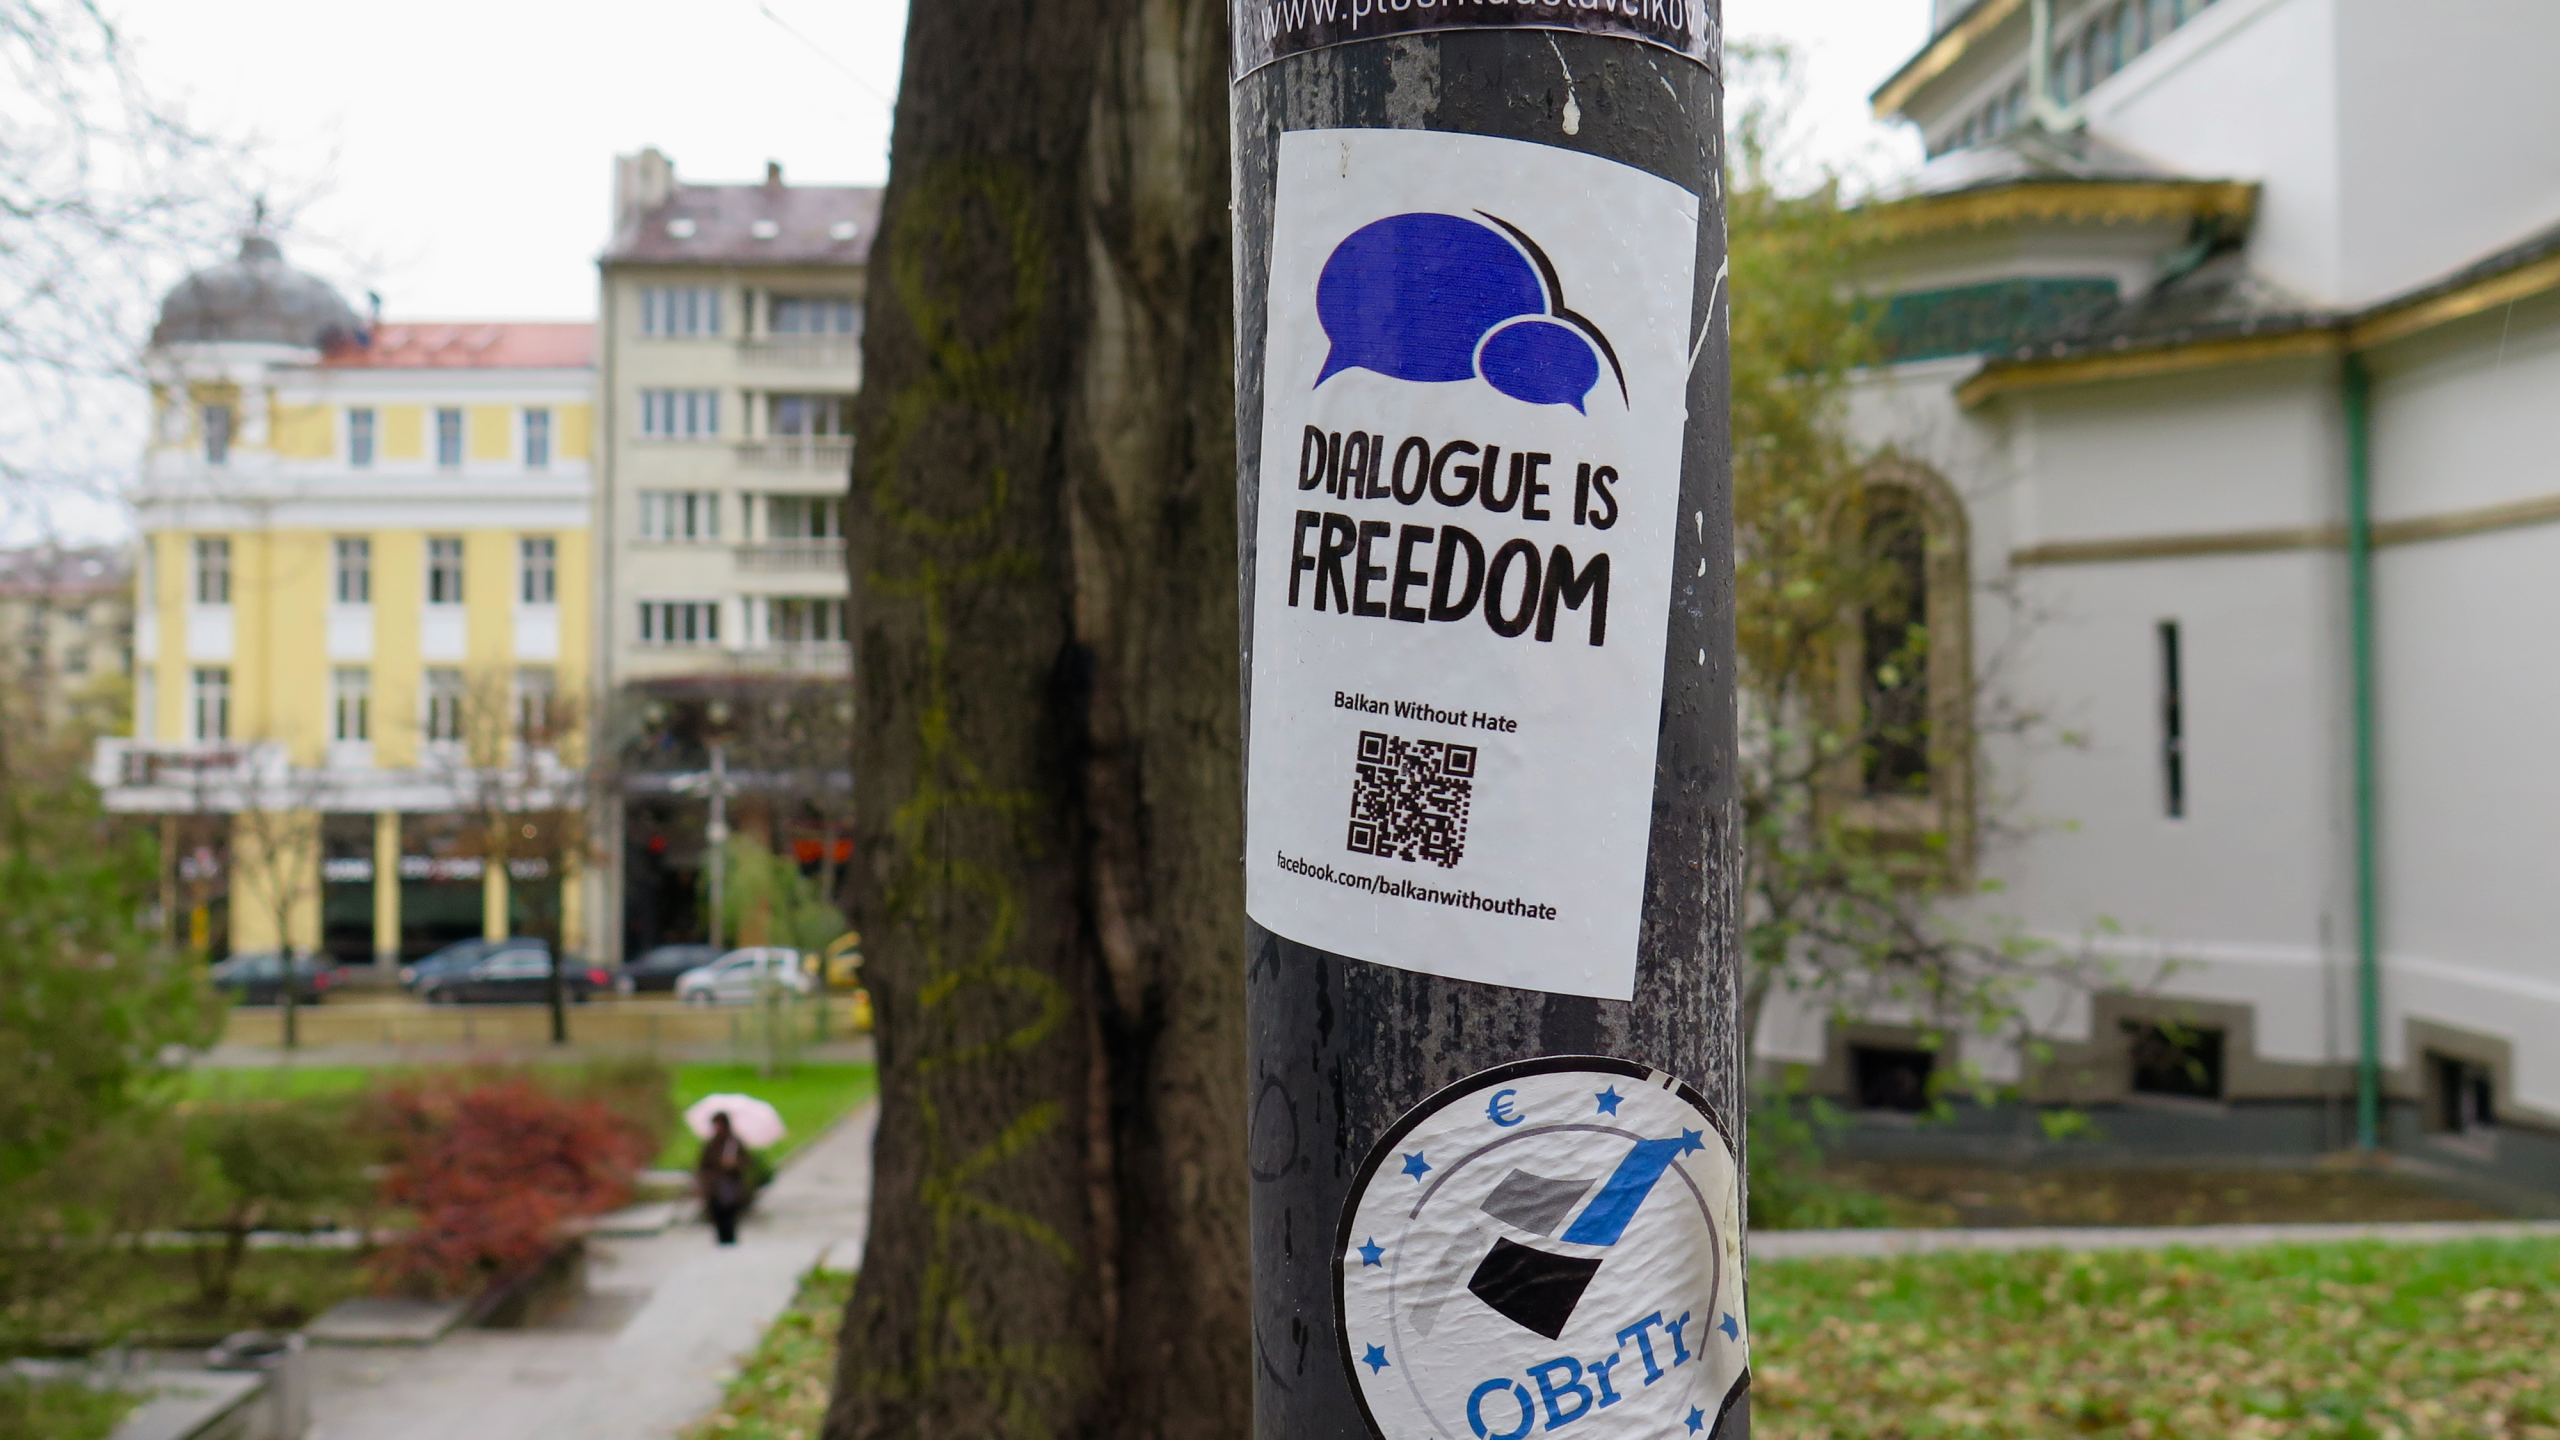 "Freedom is dialog," a political sticker in Sofia that I found relevant after experiencing the 2016 US election while traveling there. ©KettiWilhelm2016